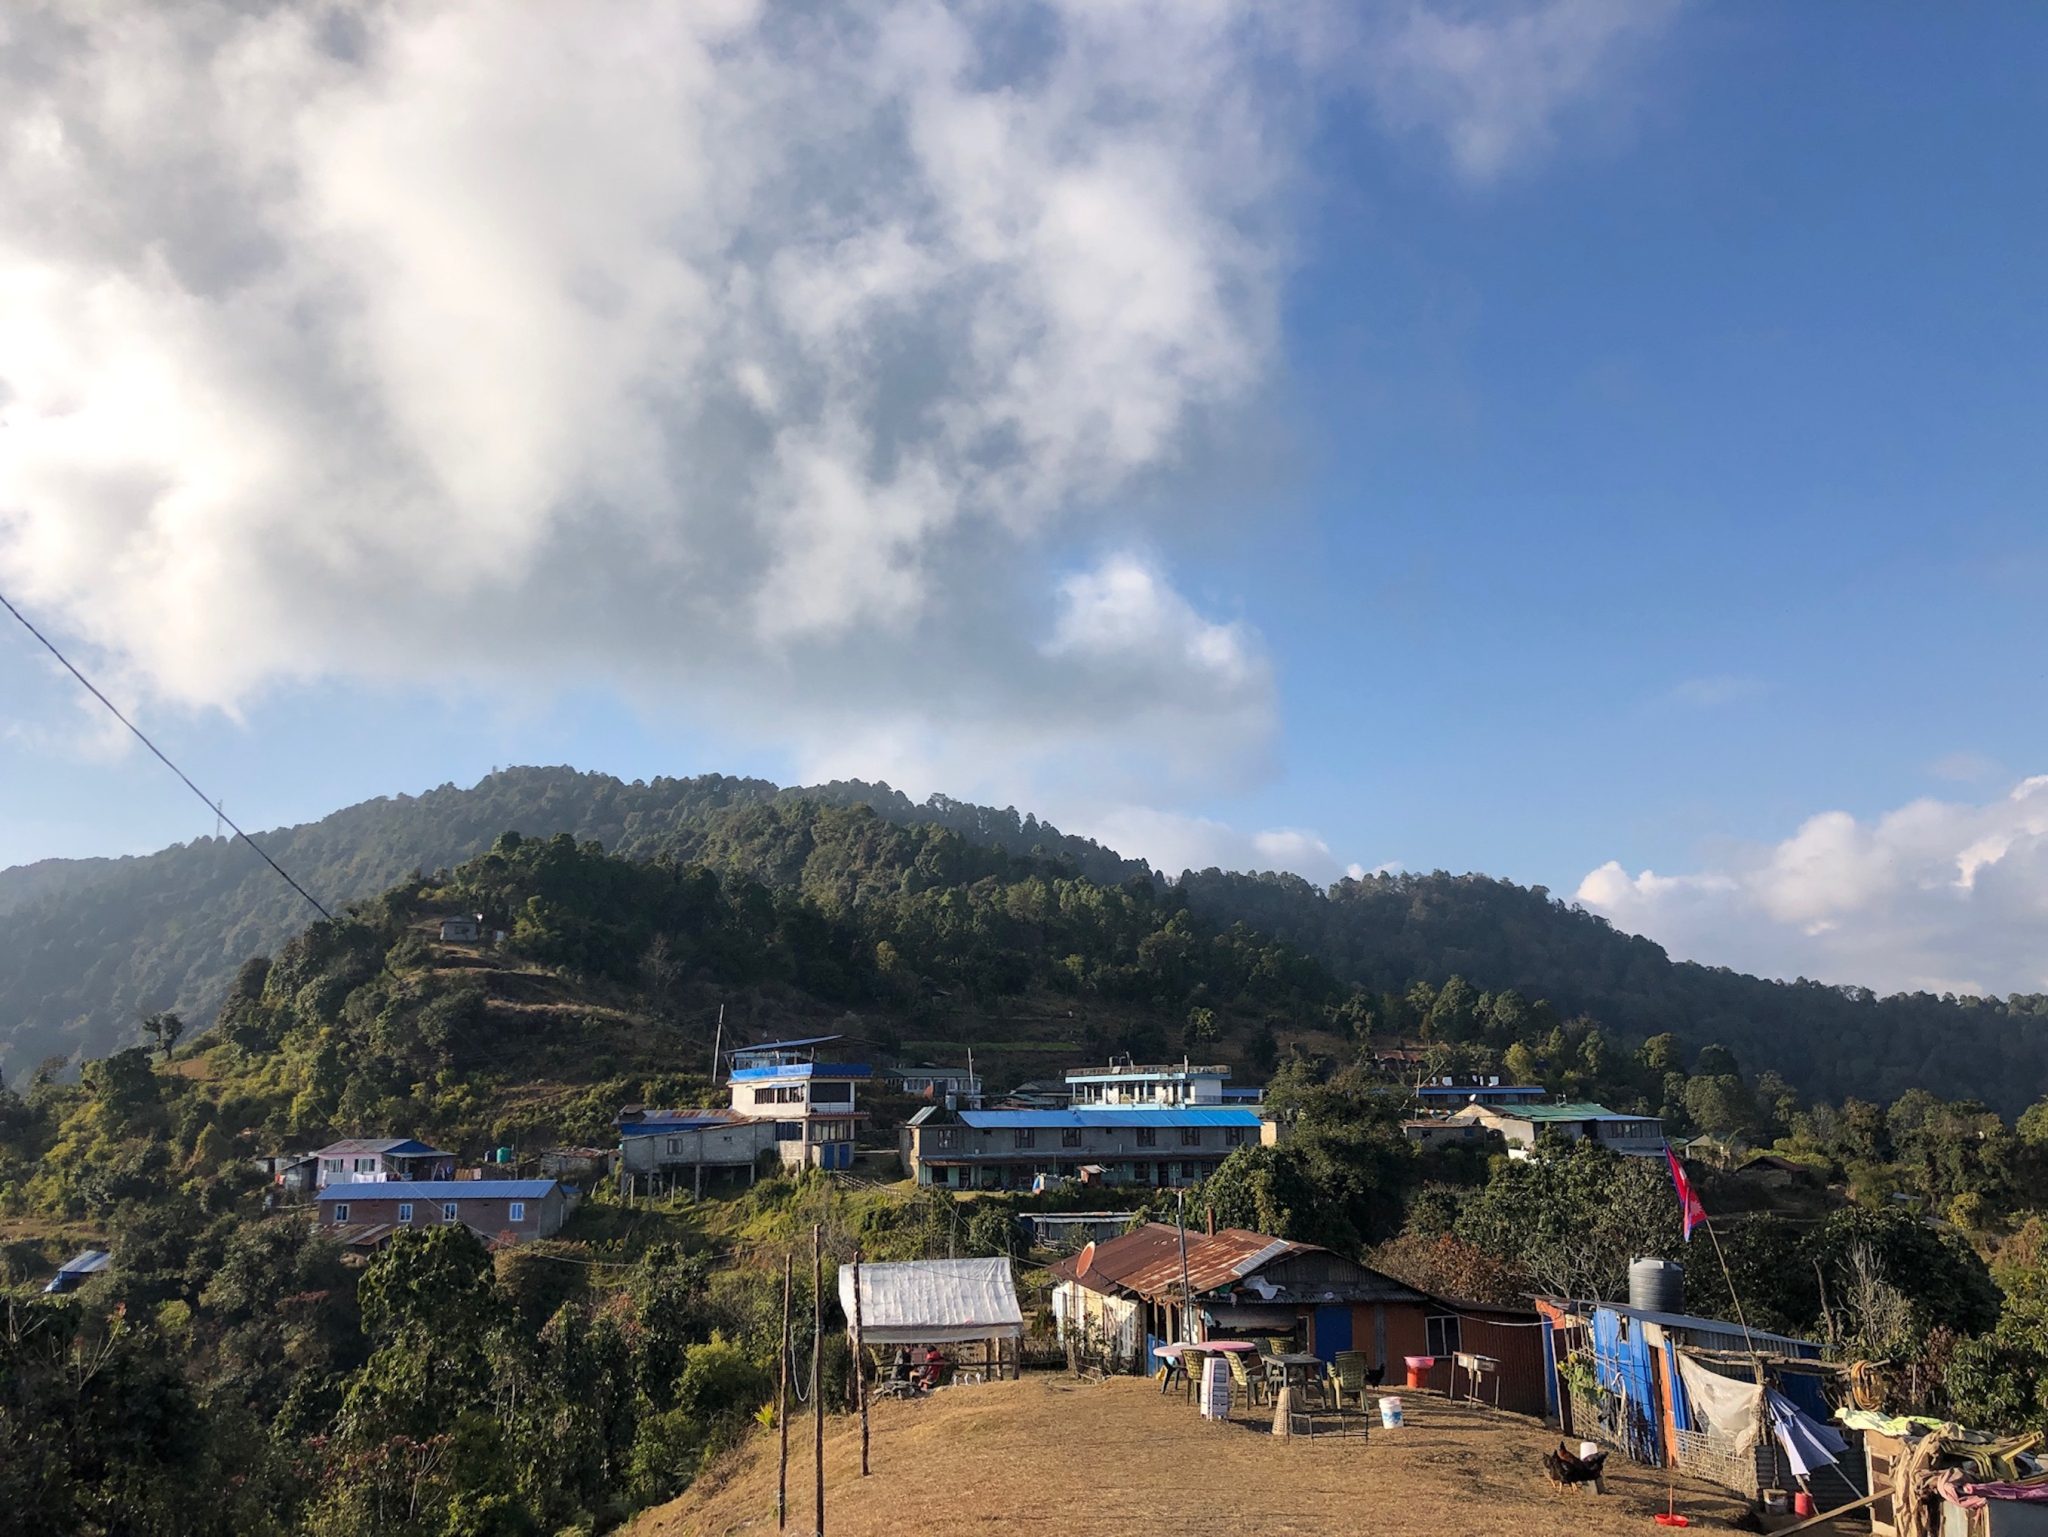 A wenstern Nepal hilly town